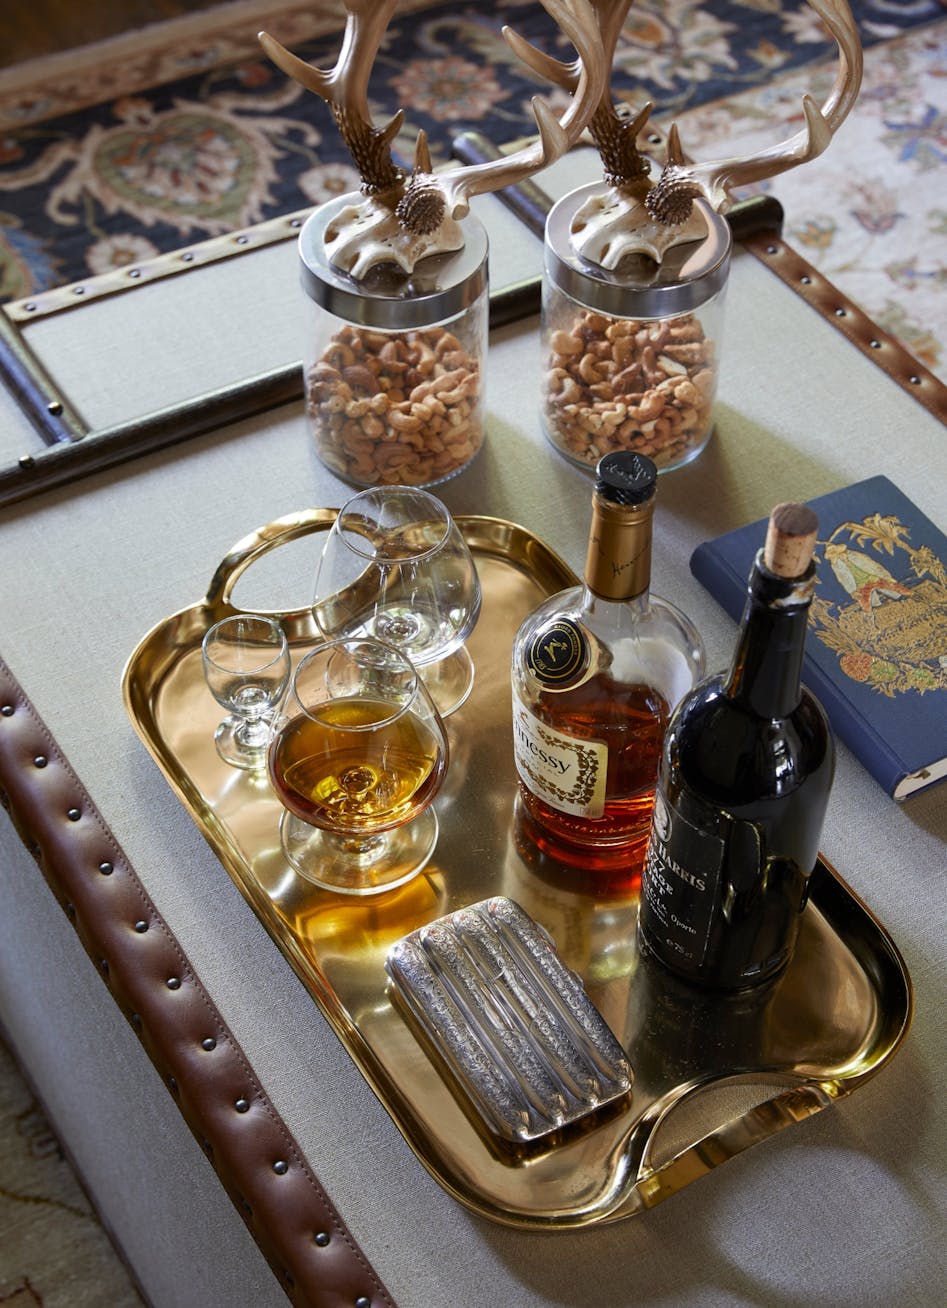 A bottle of Hennessy and a bottle of port sit on a gold tray with some glasses and what appears to be a cigarette box. Two jars contain cashew nuts, and in the background a patterned carpet is visible.